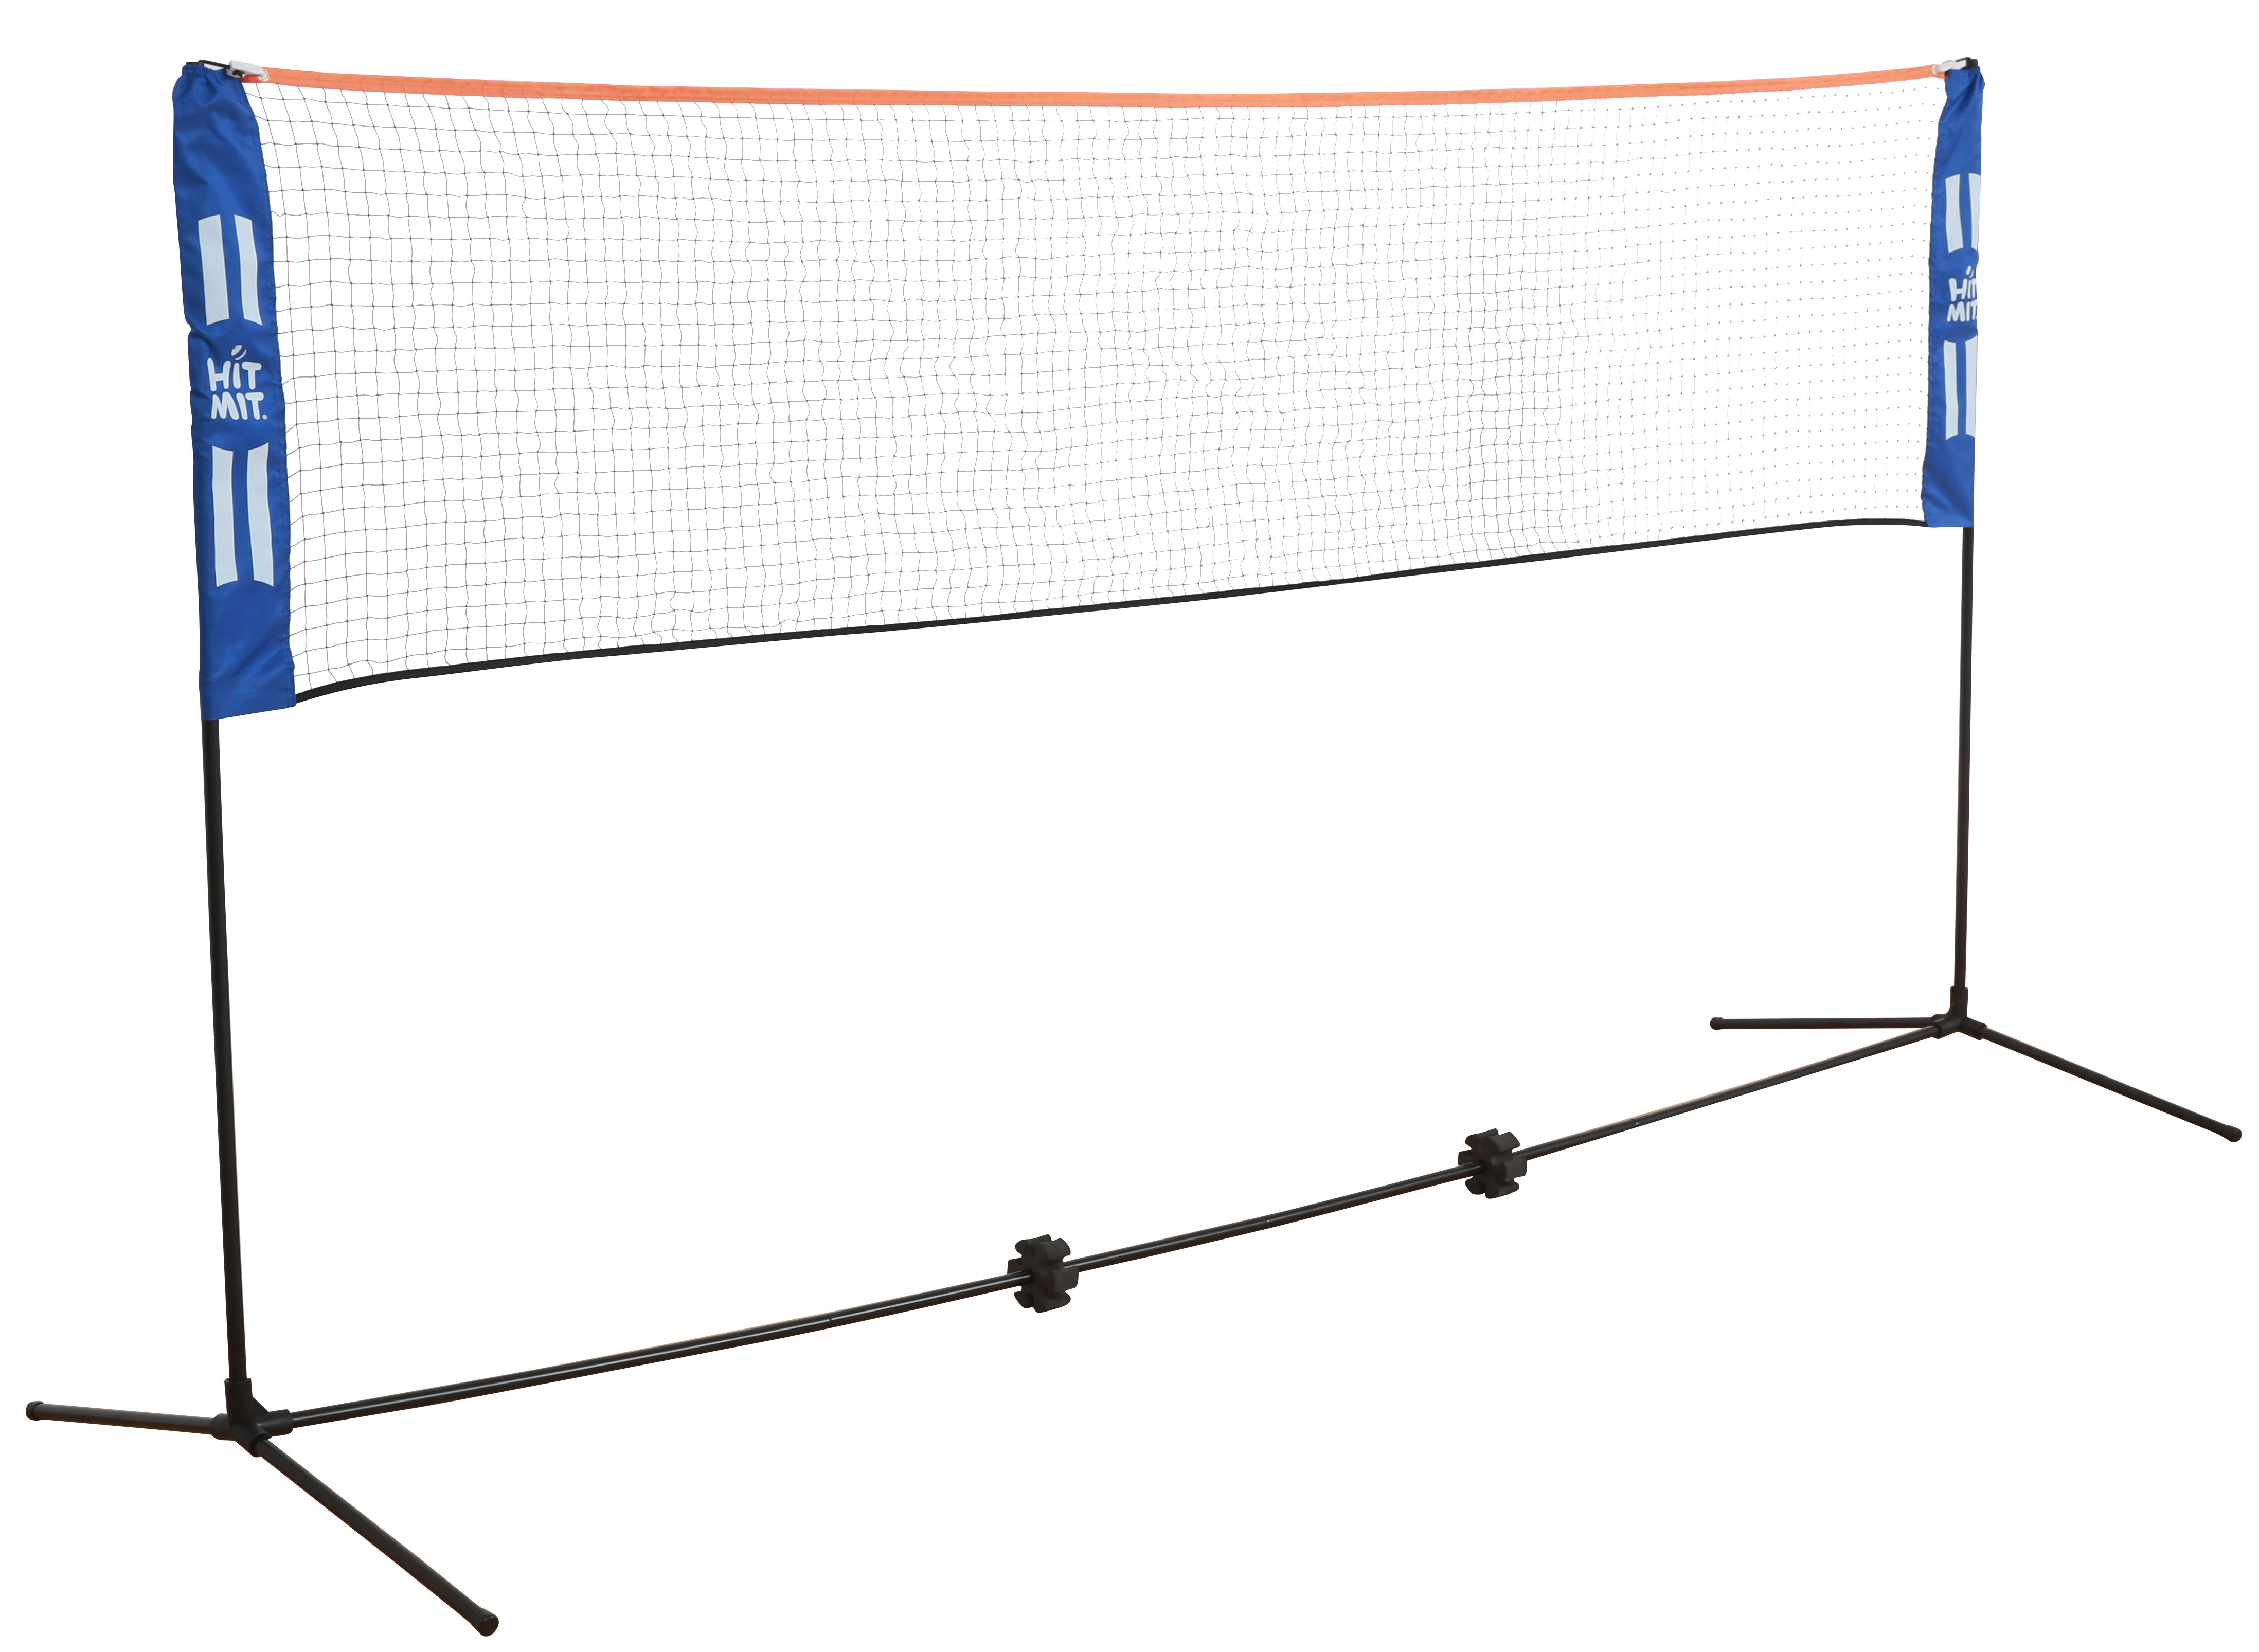 Details about   20FT Badminton Volleyball Tennis Net Outdoor Exercise Portable Standard Mesh Net 